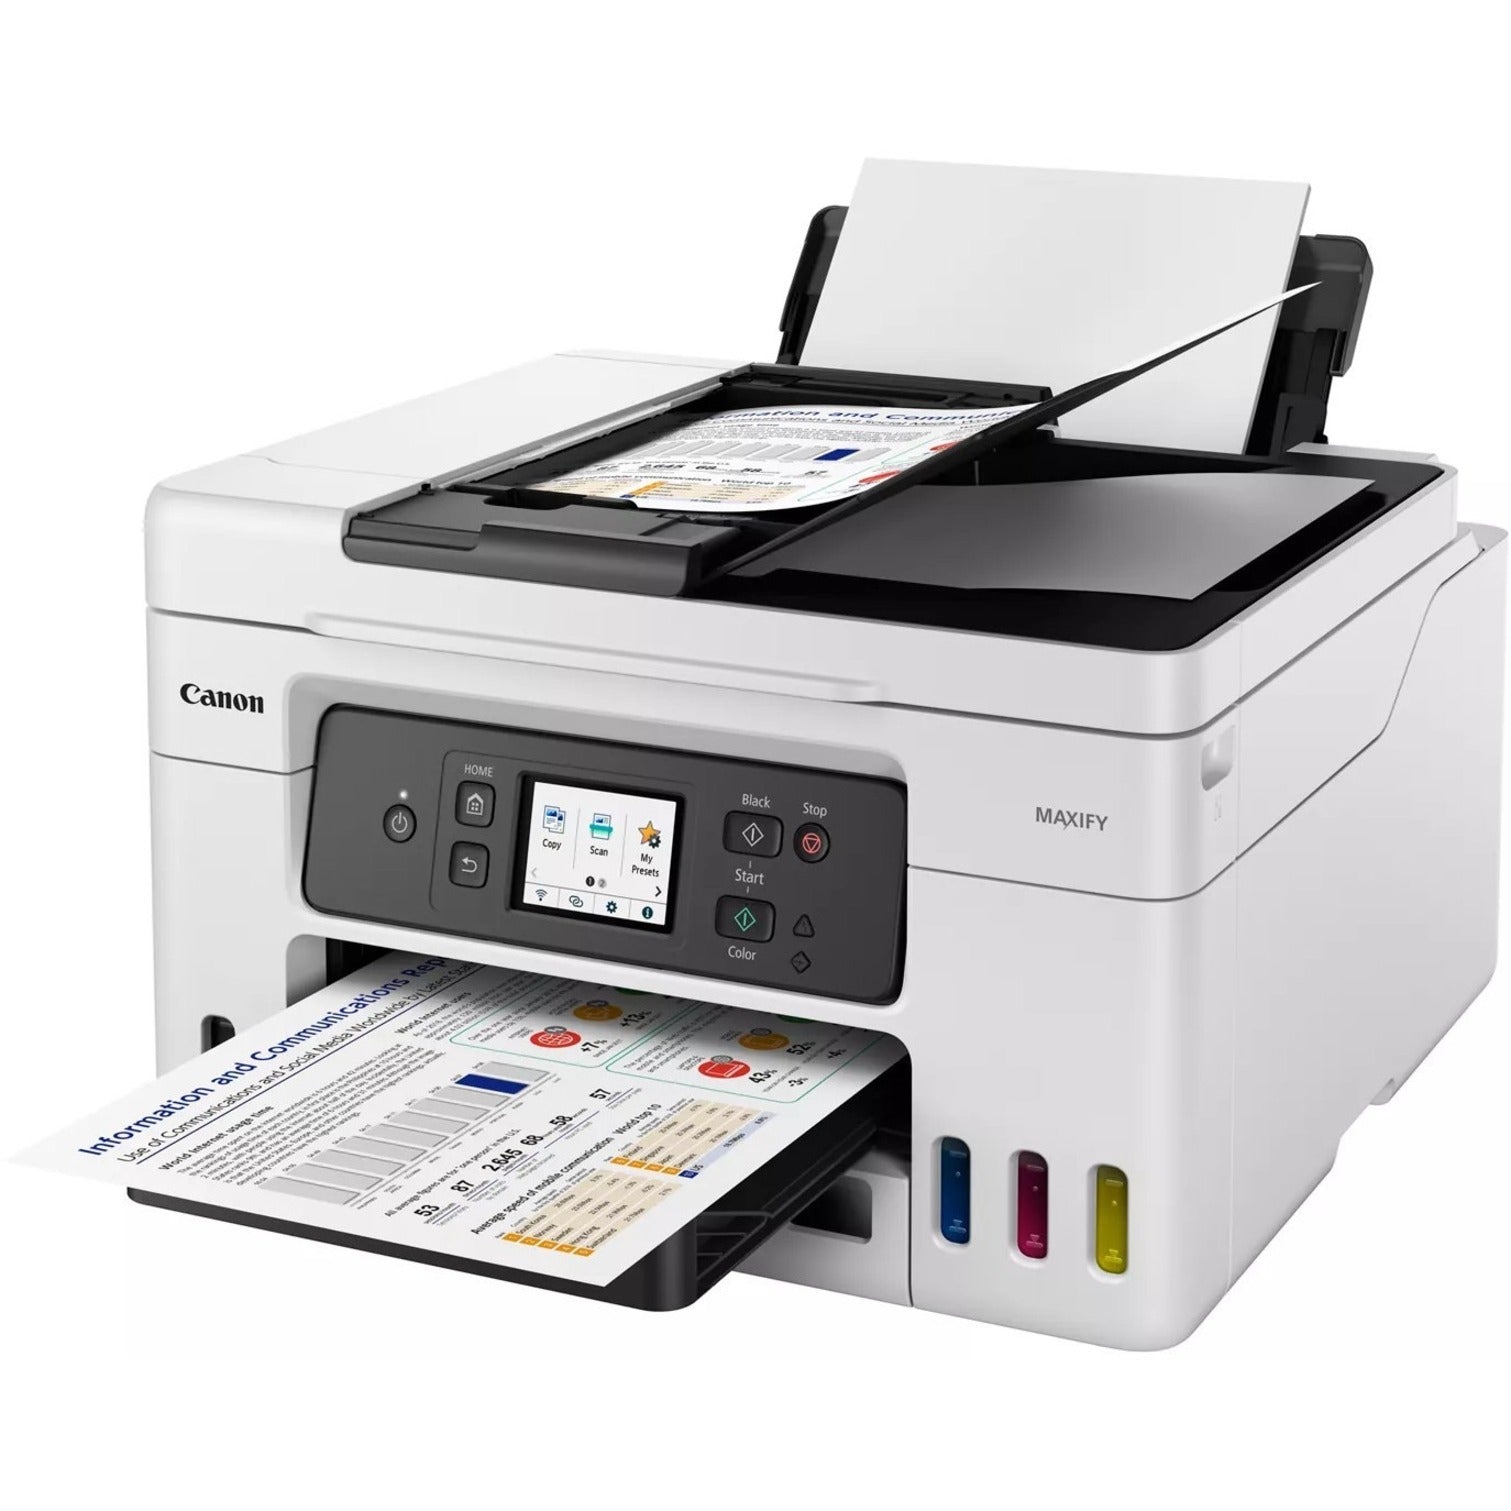 Canon 5779C002 MAXIFY GX4020 Wireless MegaTank Small Office All-In-One Printer, Color Inkjet Multifunction Printer